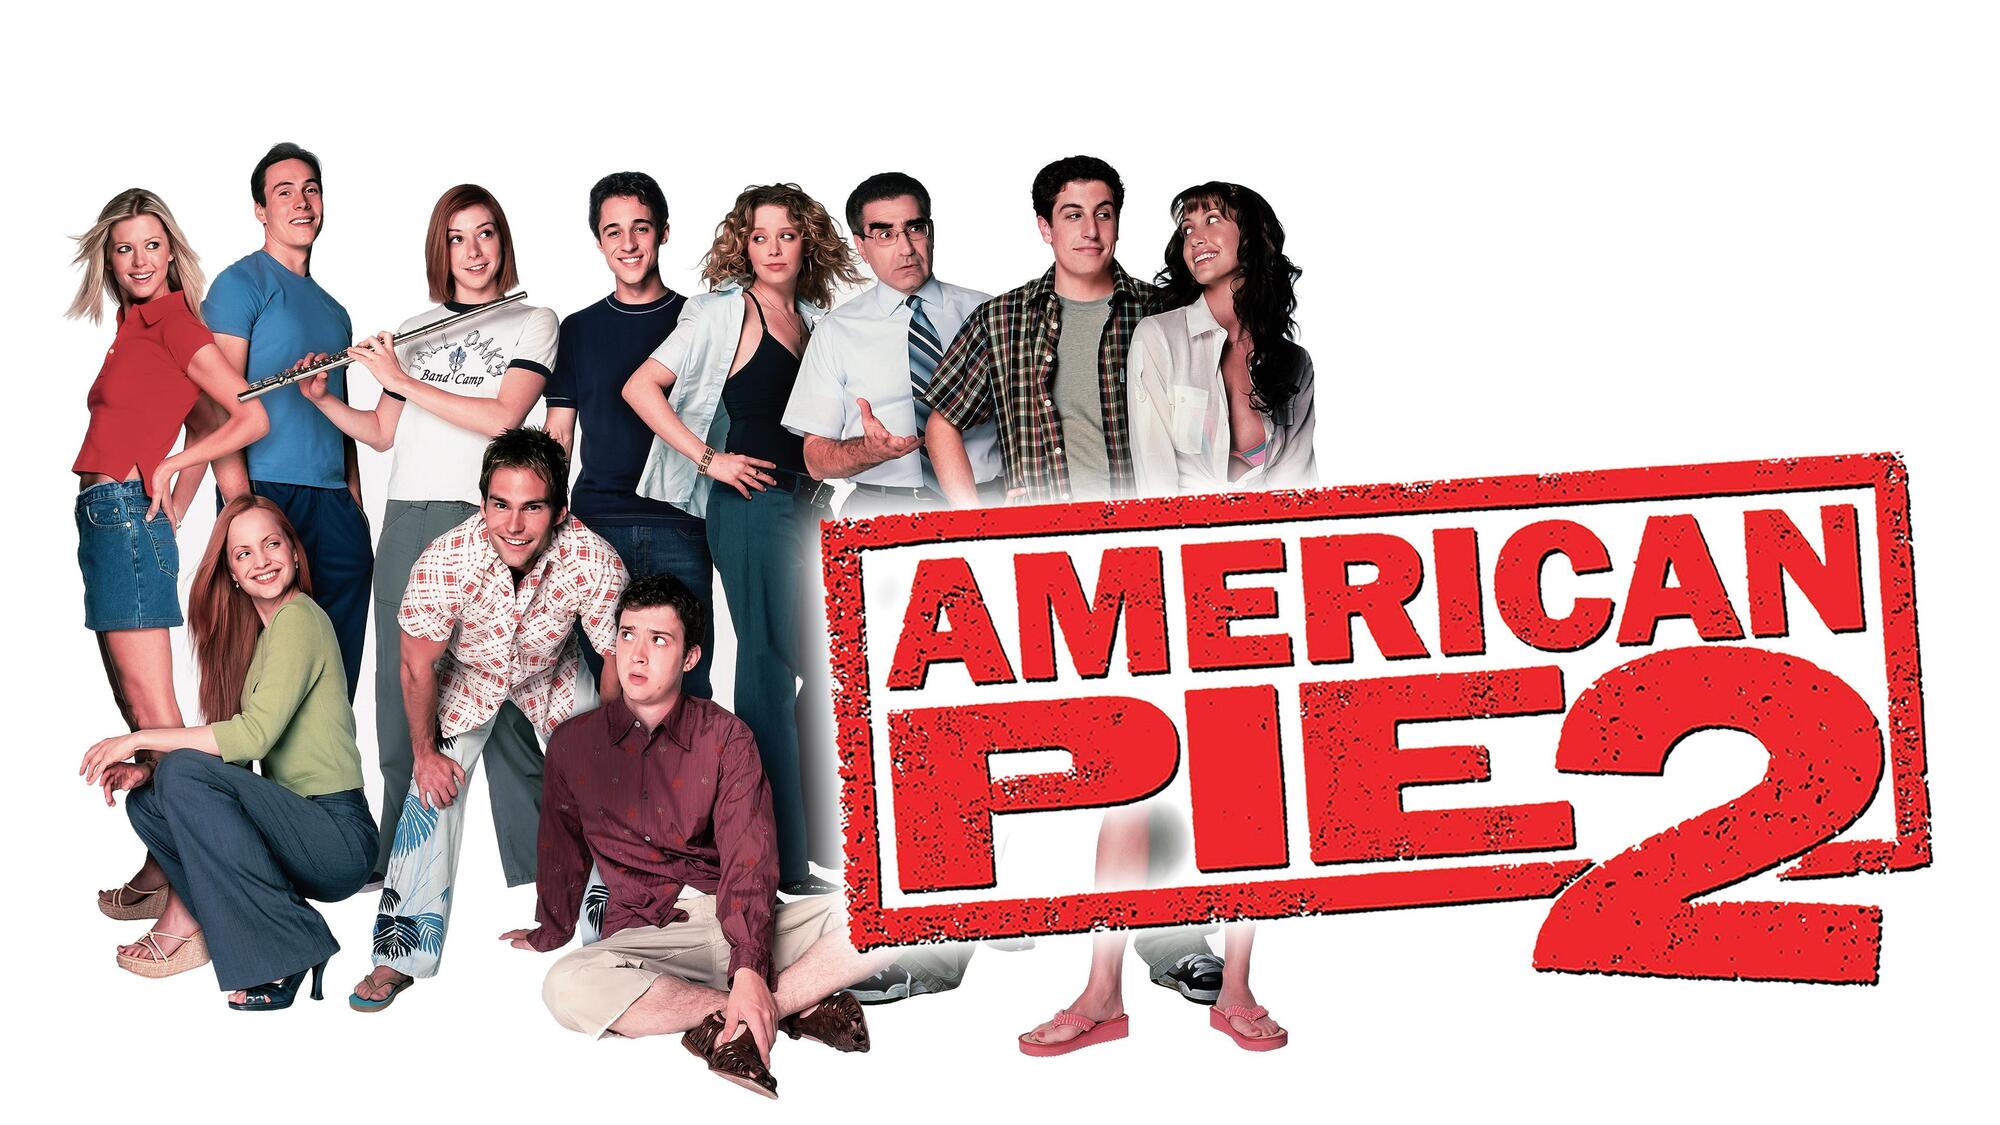 41-facts-about-the-movie-american-pie-2